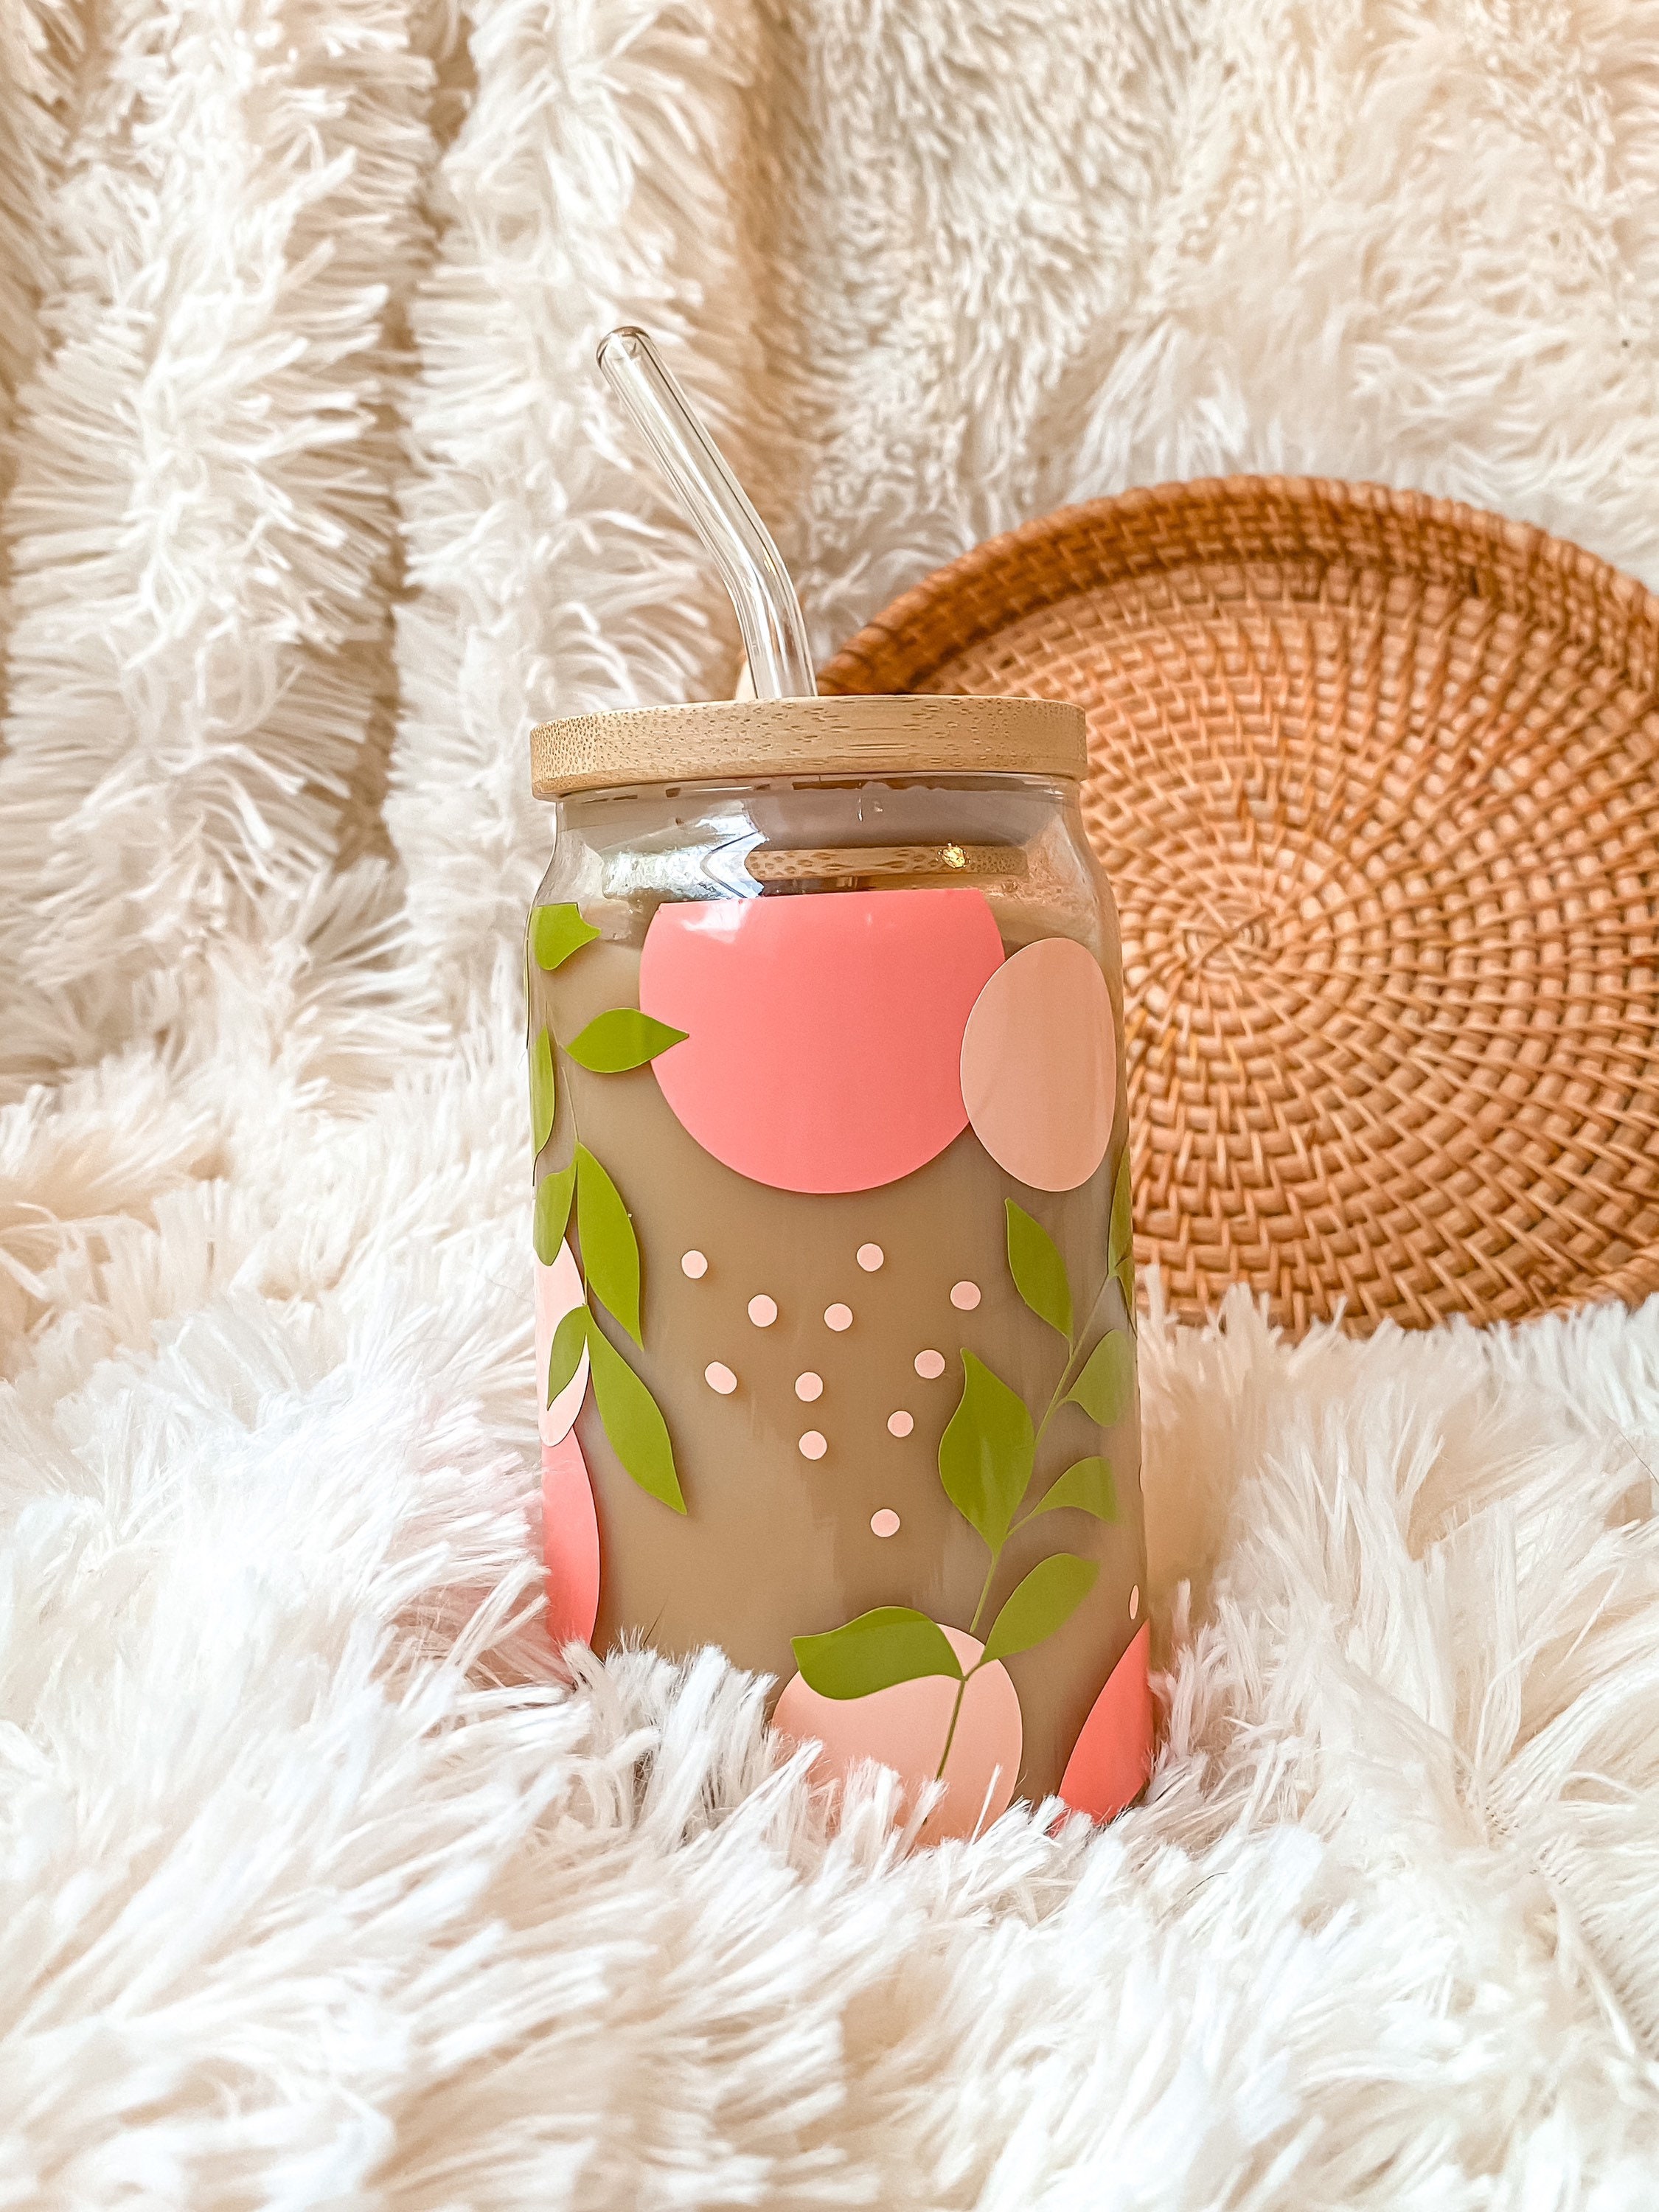 Good Things Take Time Aesthetic Beer Can Shaped Glass Cute Boho